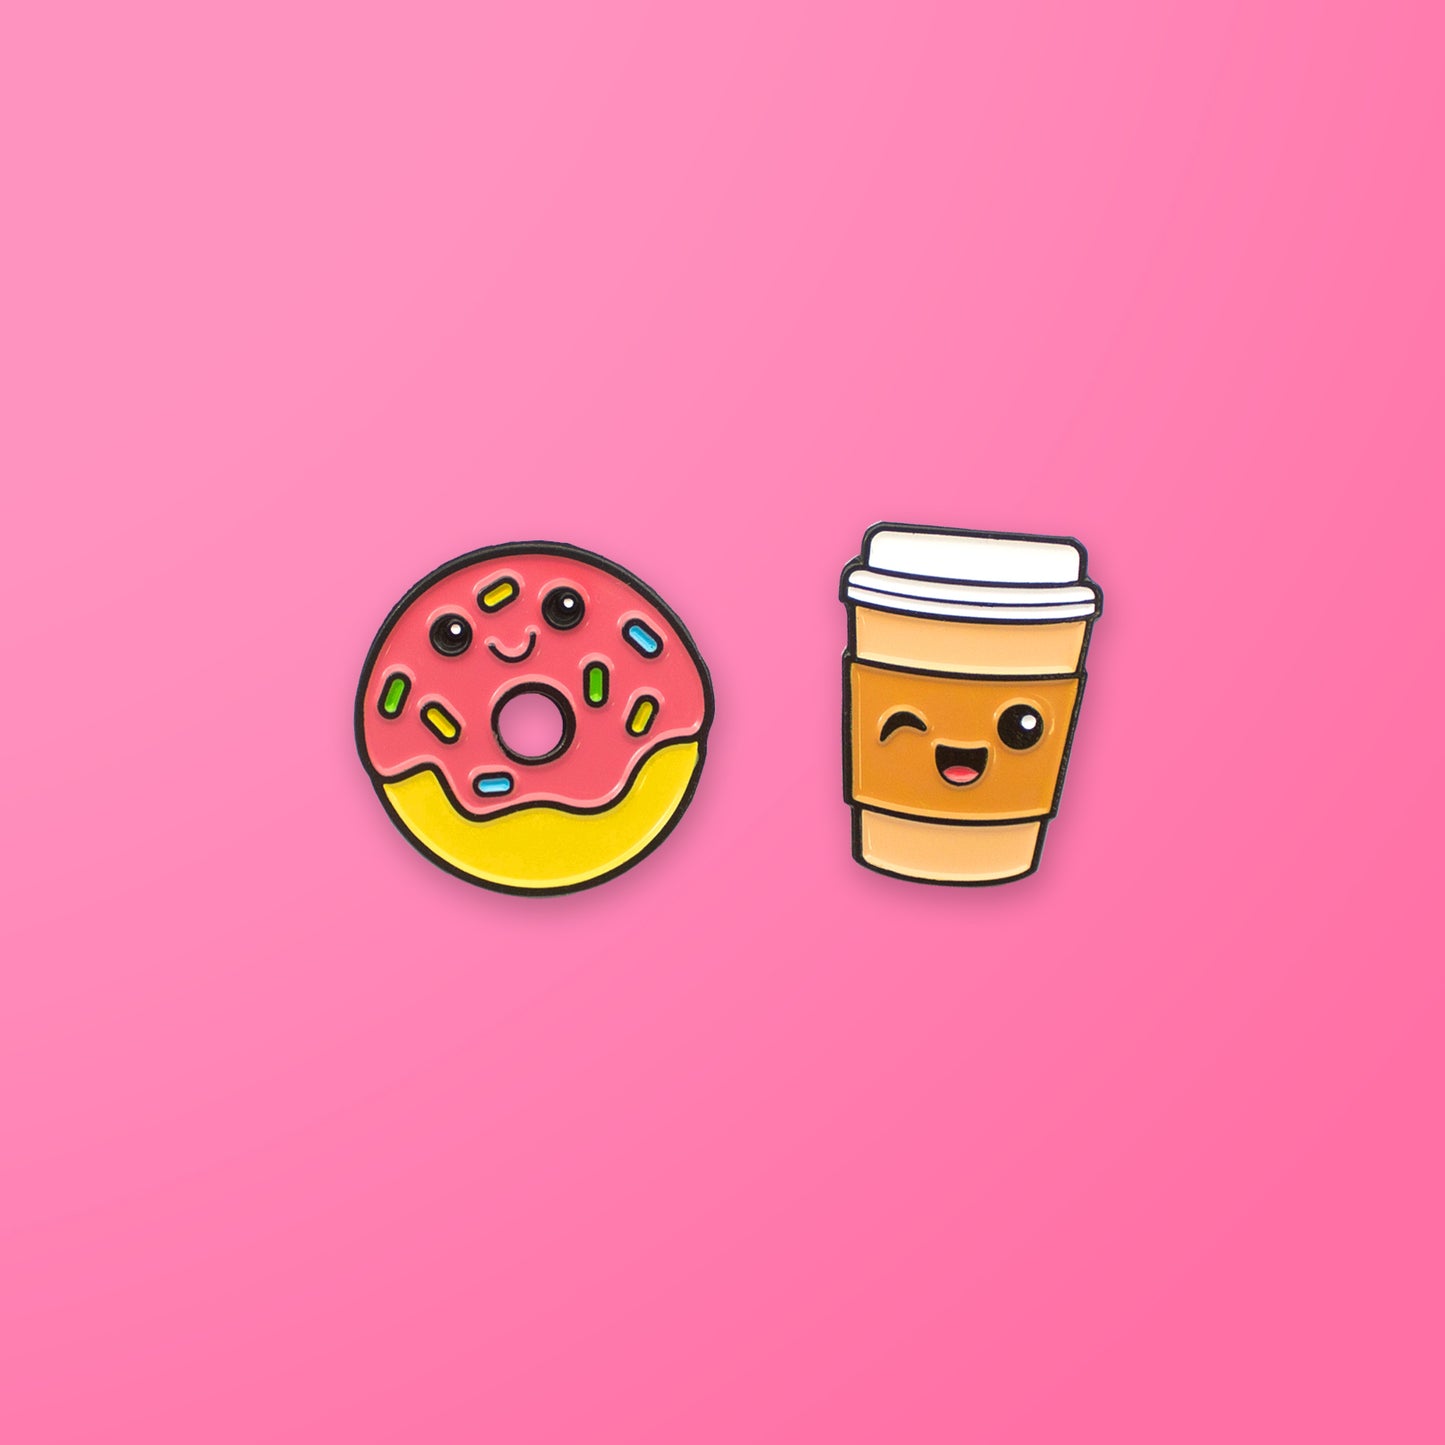 Donut and Coffee enamel pin set on pink background